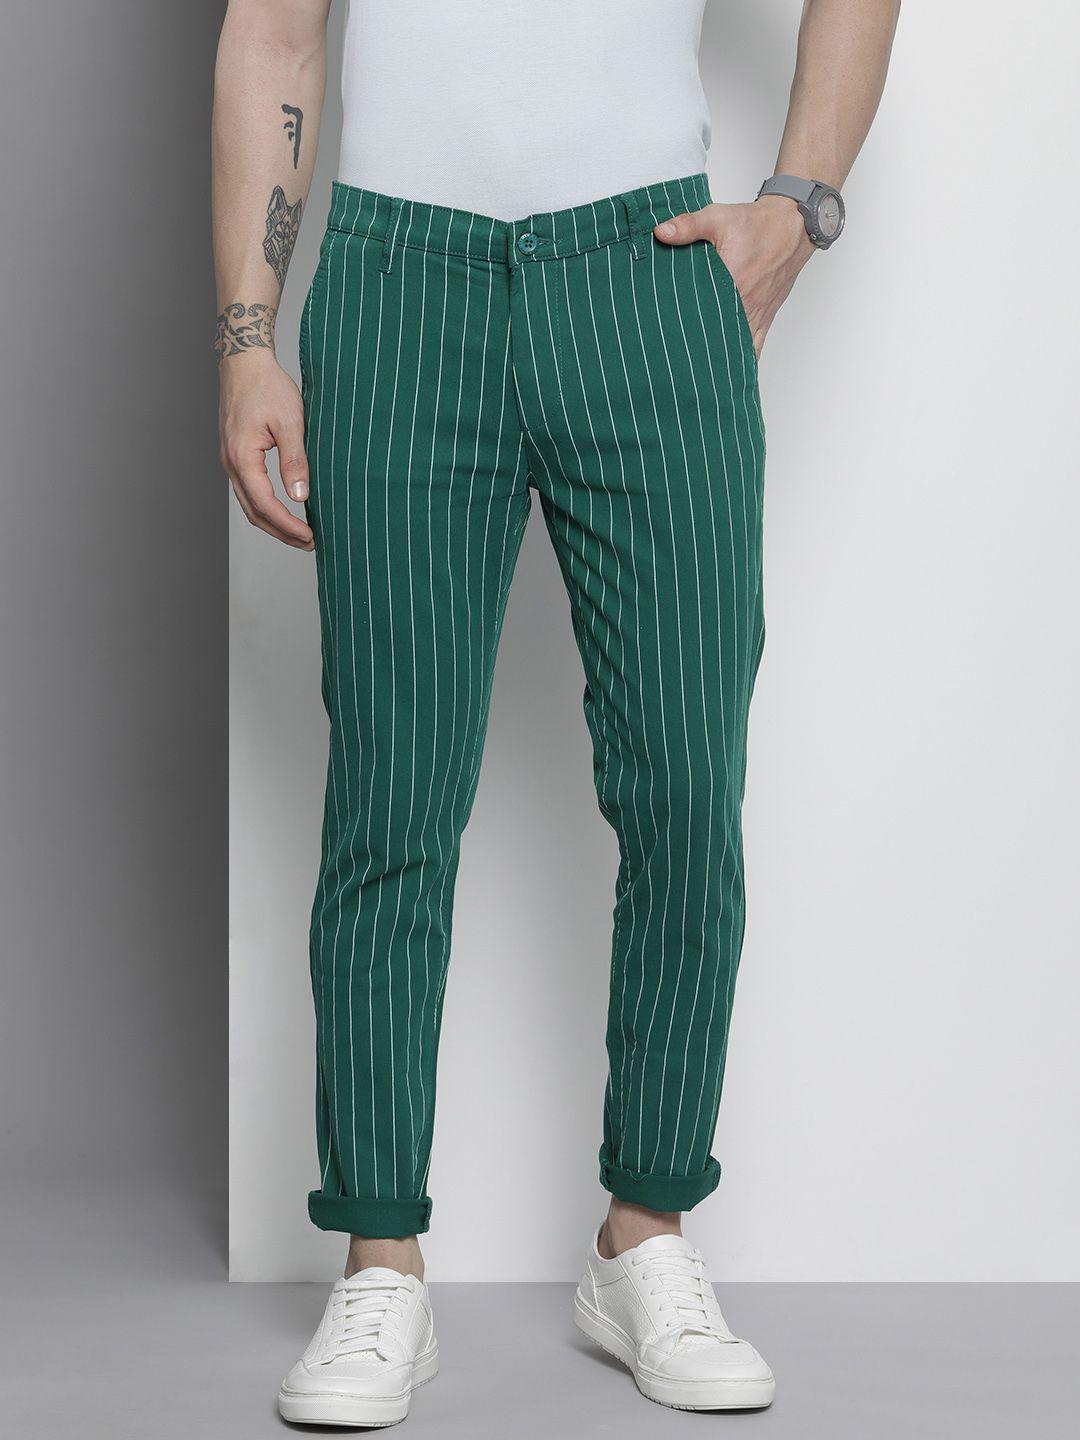 the-indian-garage-co-men-green-striped-slim-fit-chinos